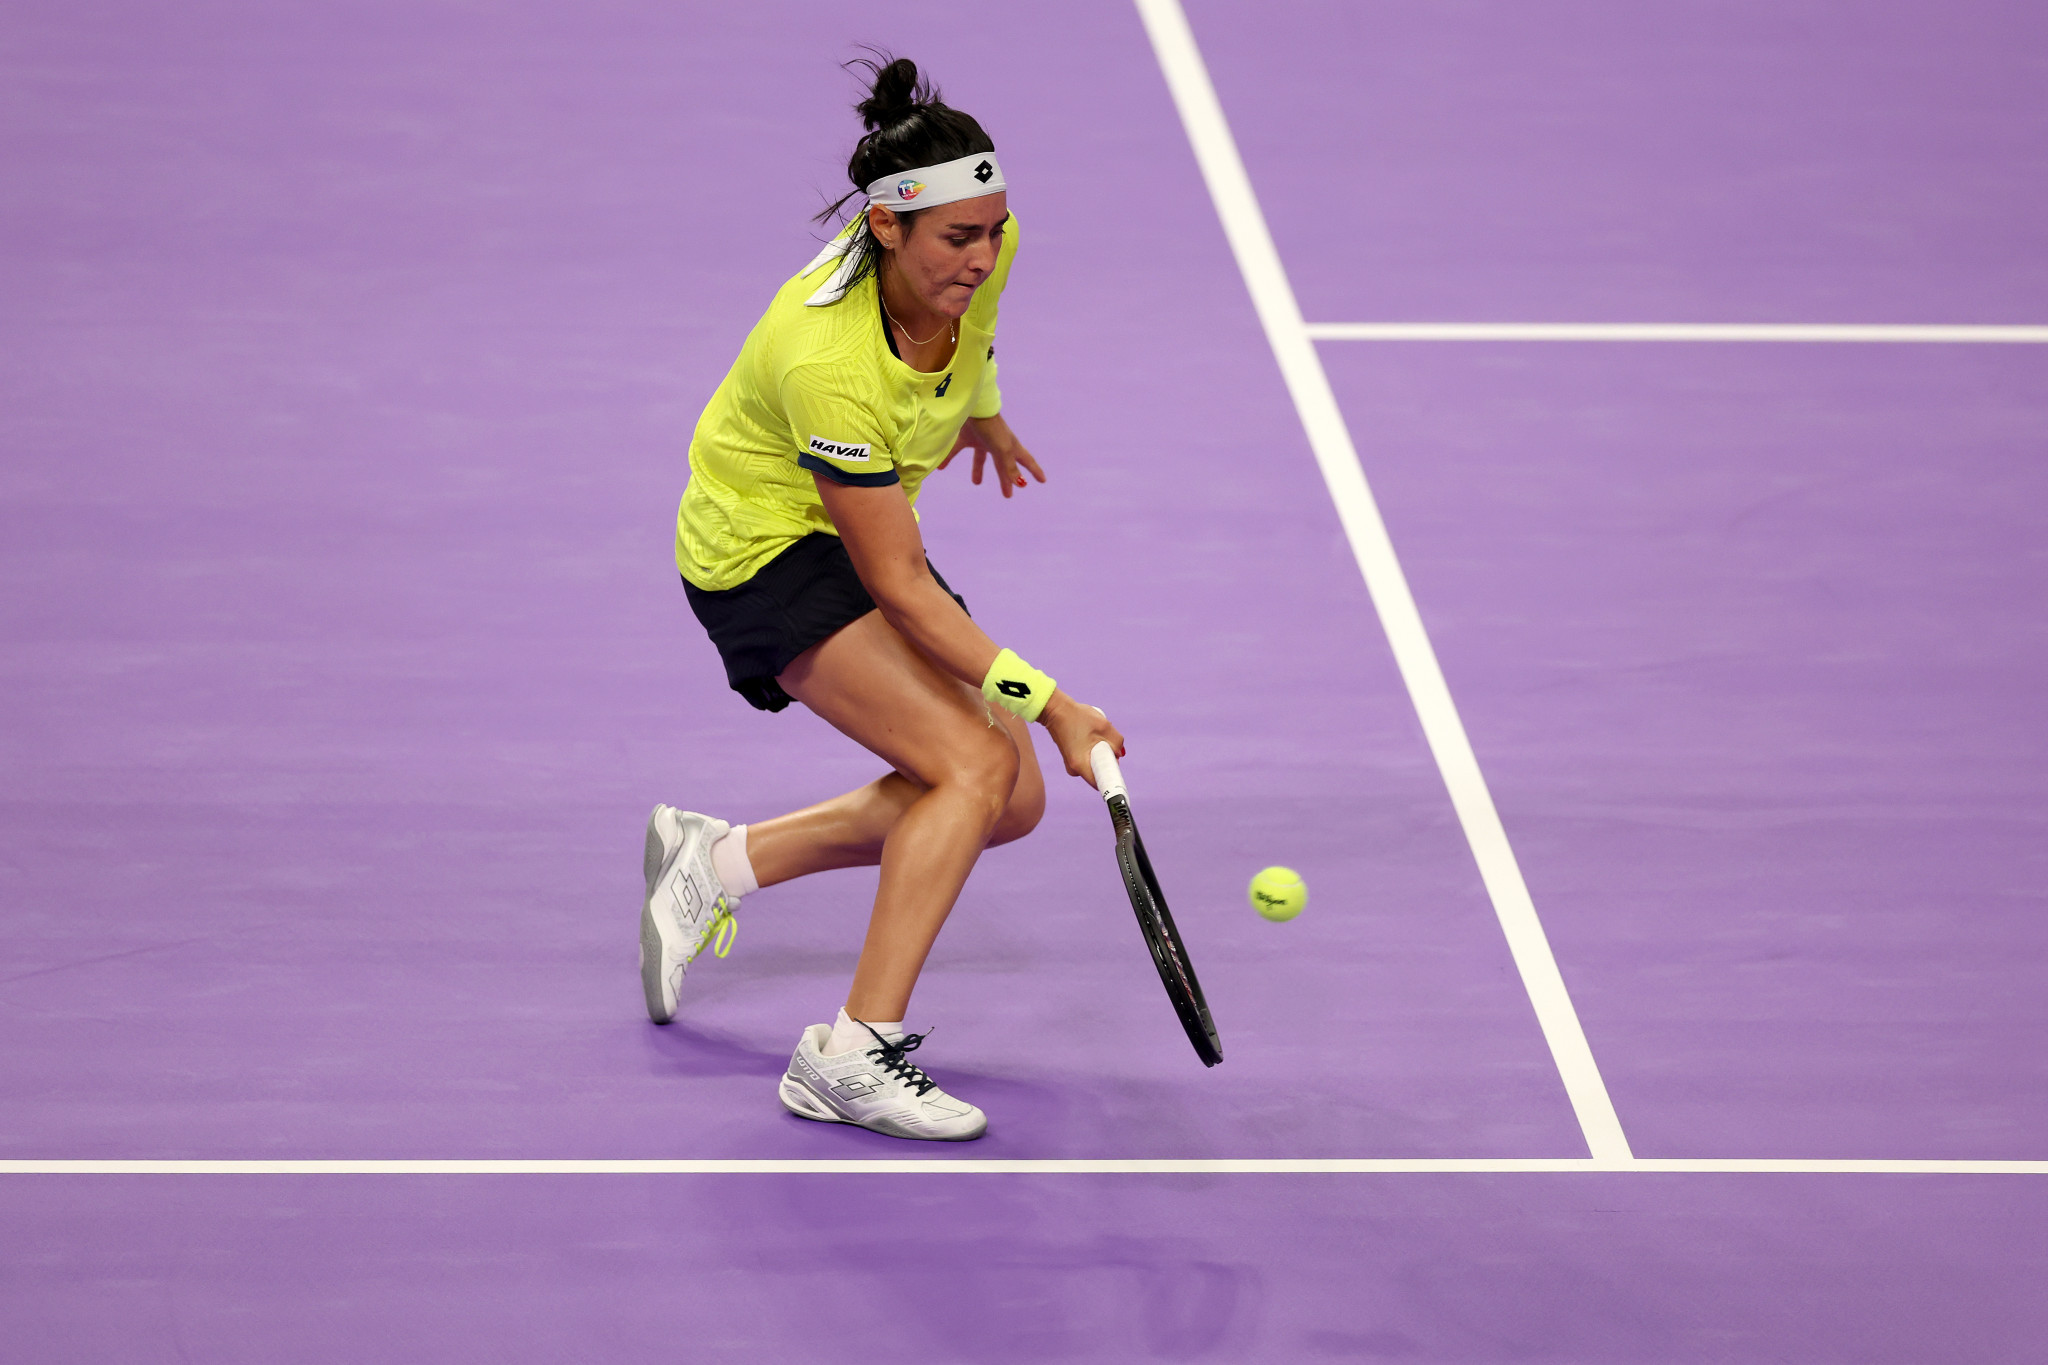 Tunisia's Ons Jabeur has been a standout on this season's WTA Tour, but lost her Finals opener to Belarusian neutral Aryna Sabalenka in Fort Worth ©Getty Images